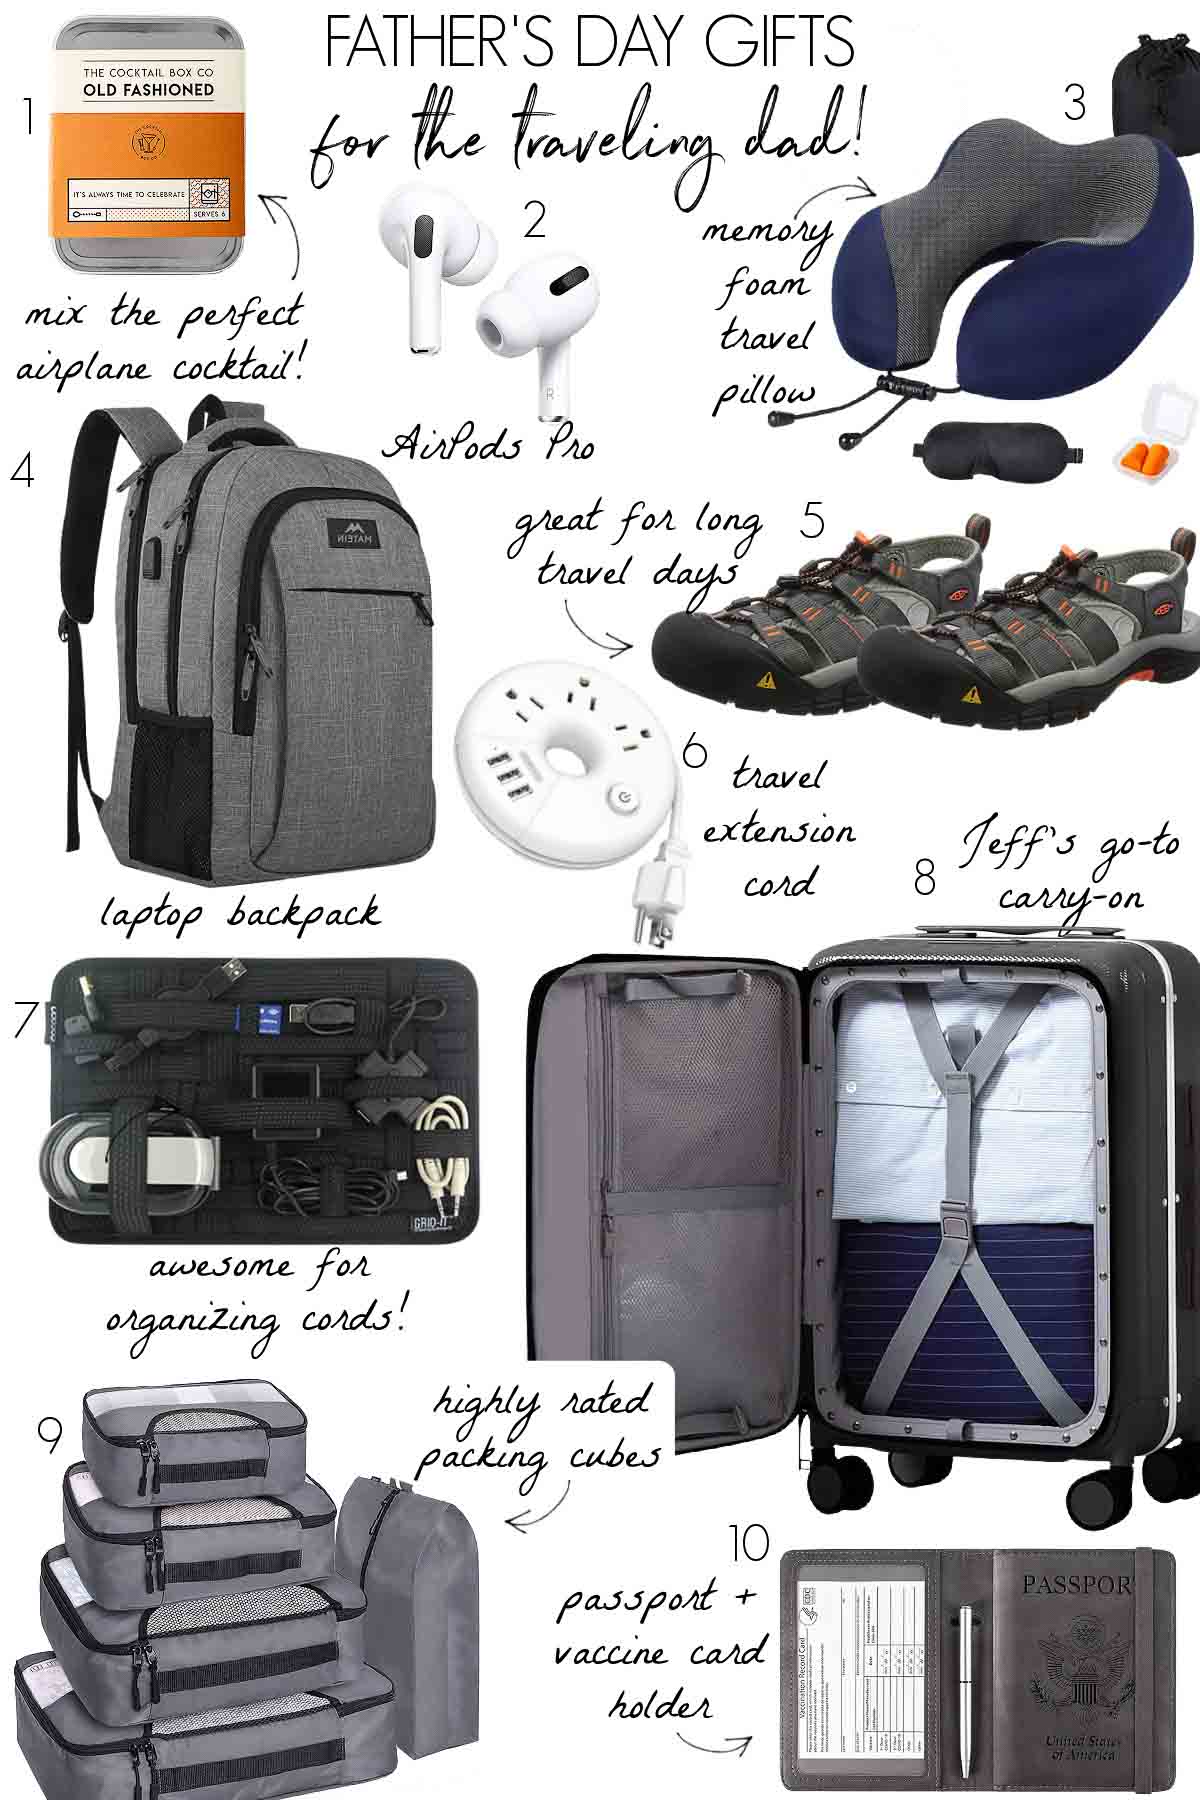 Father's Day gift ideas for the traveling dad